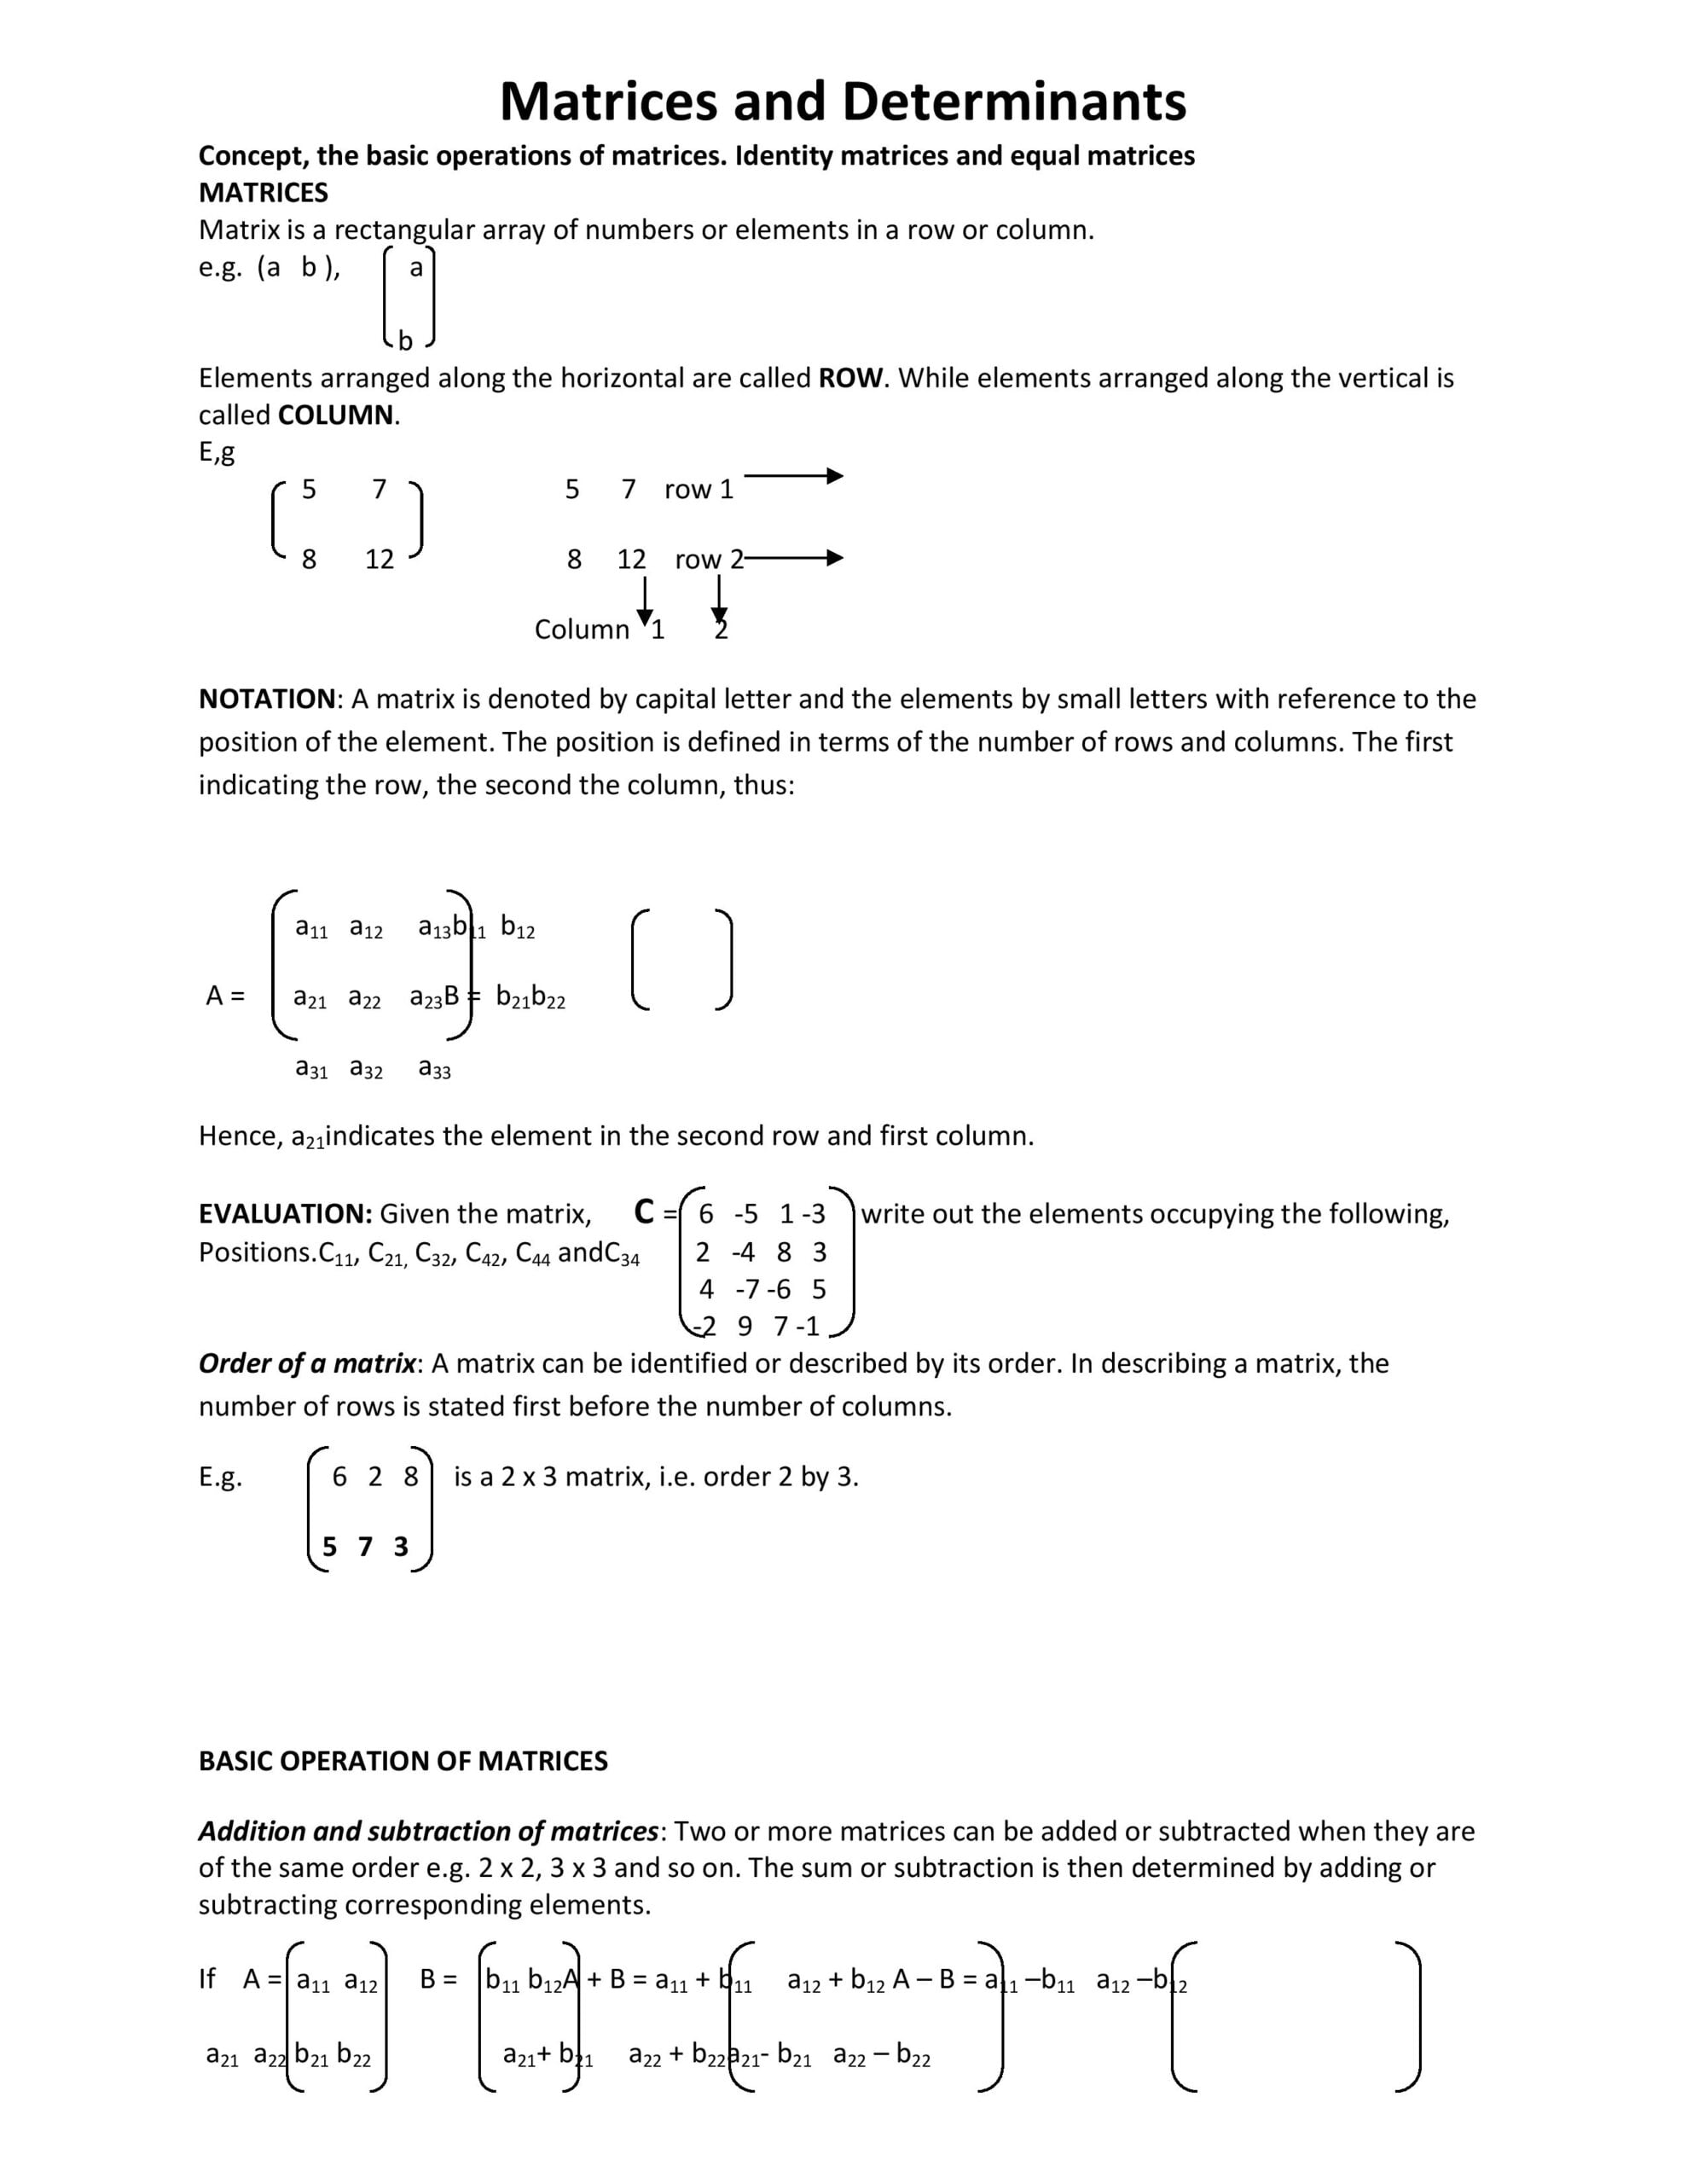 Matrices and Determinants_1